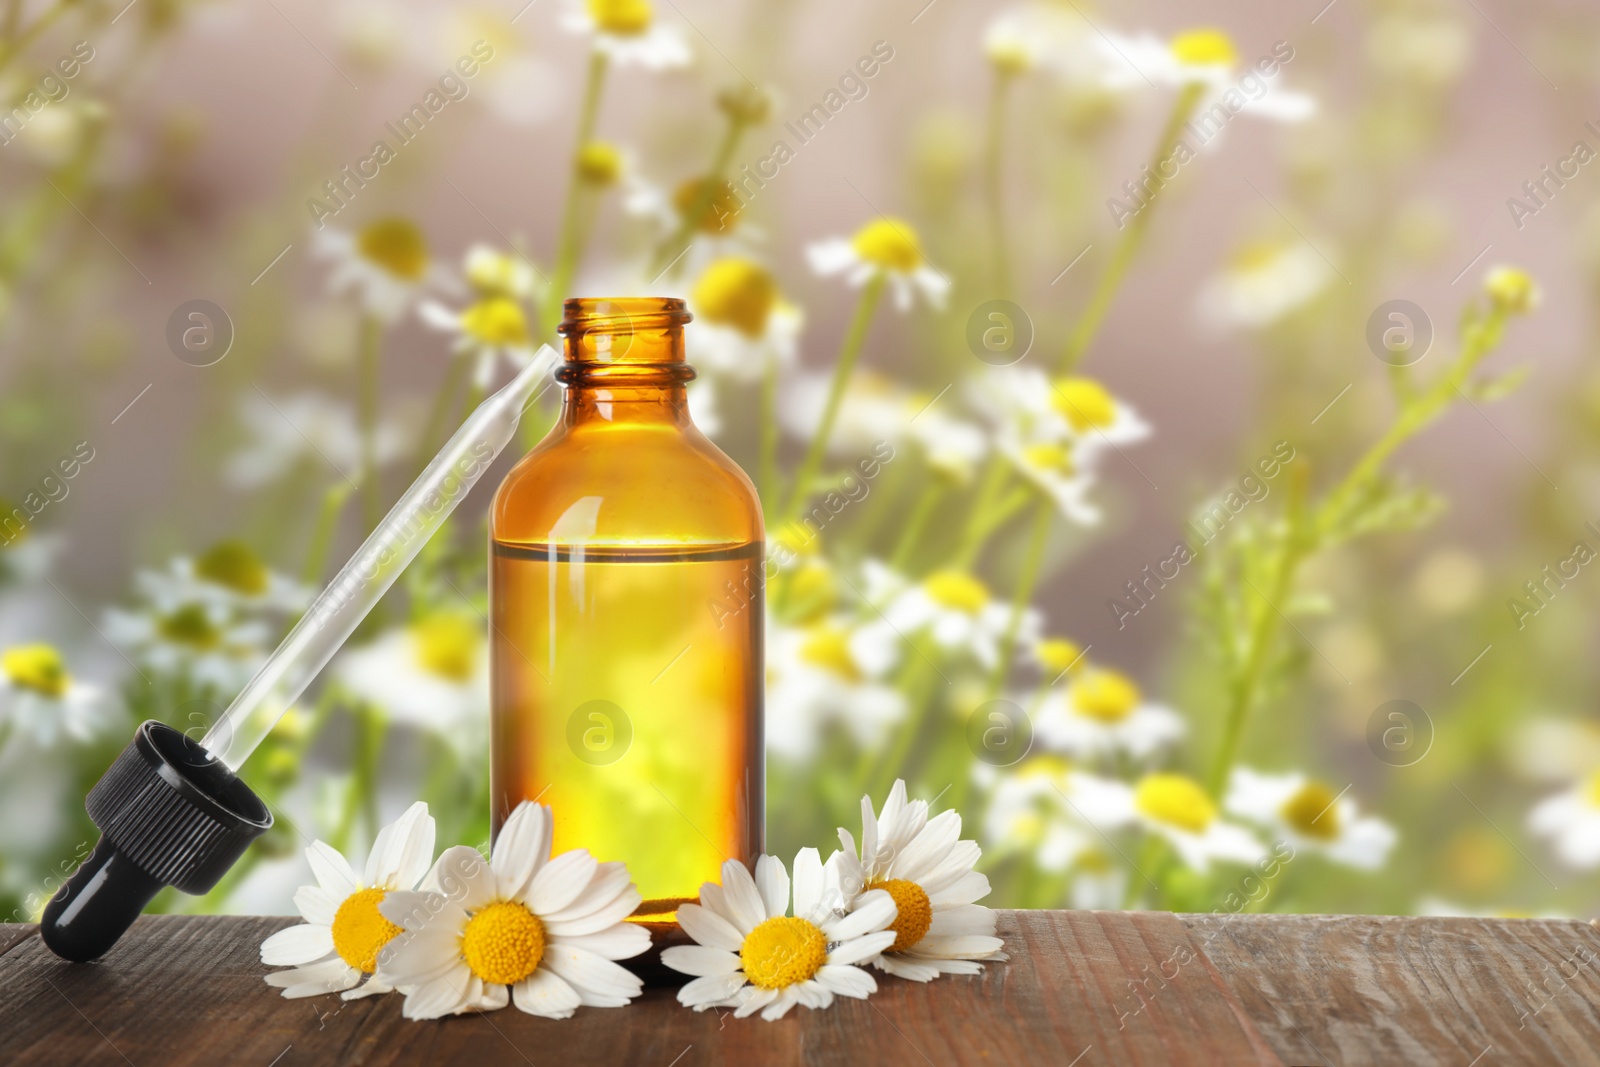 Image of Bottle of essential oil and chamomile flowers on wooden table against blurred background. Space for text